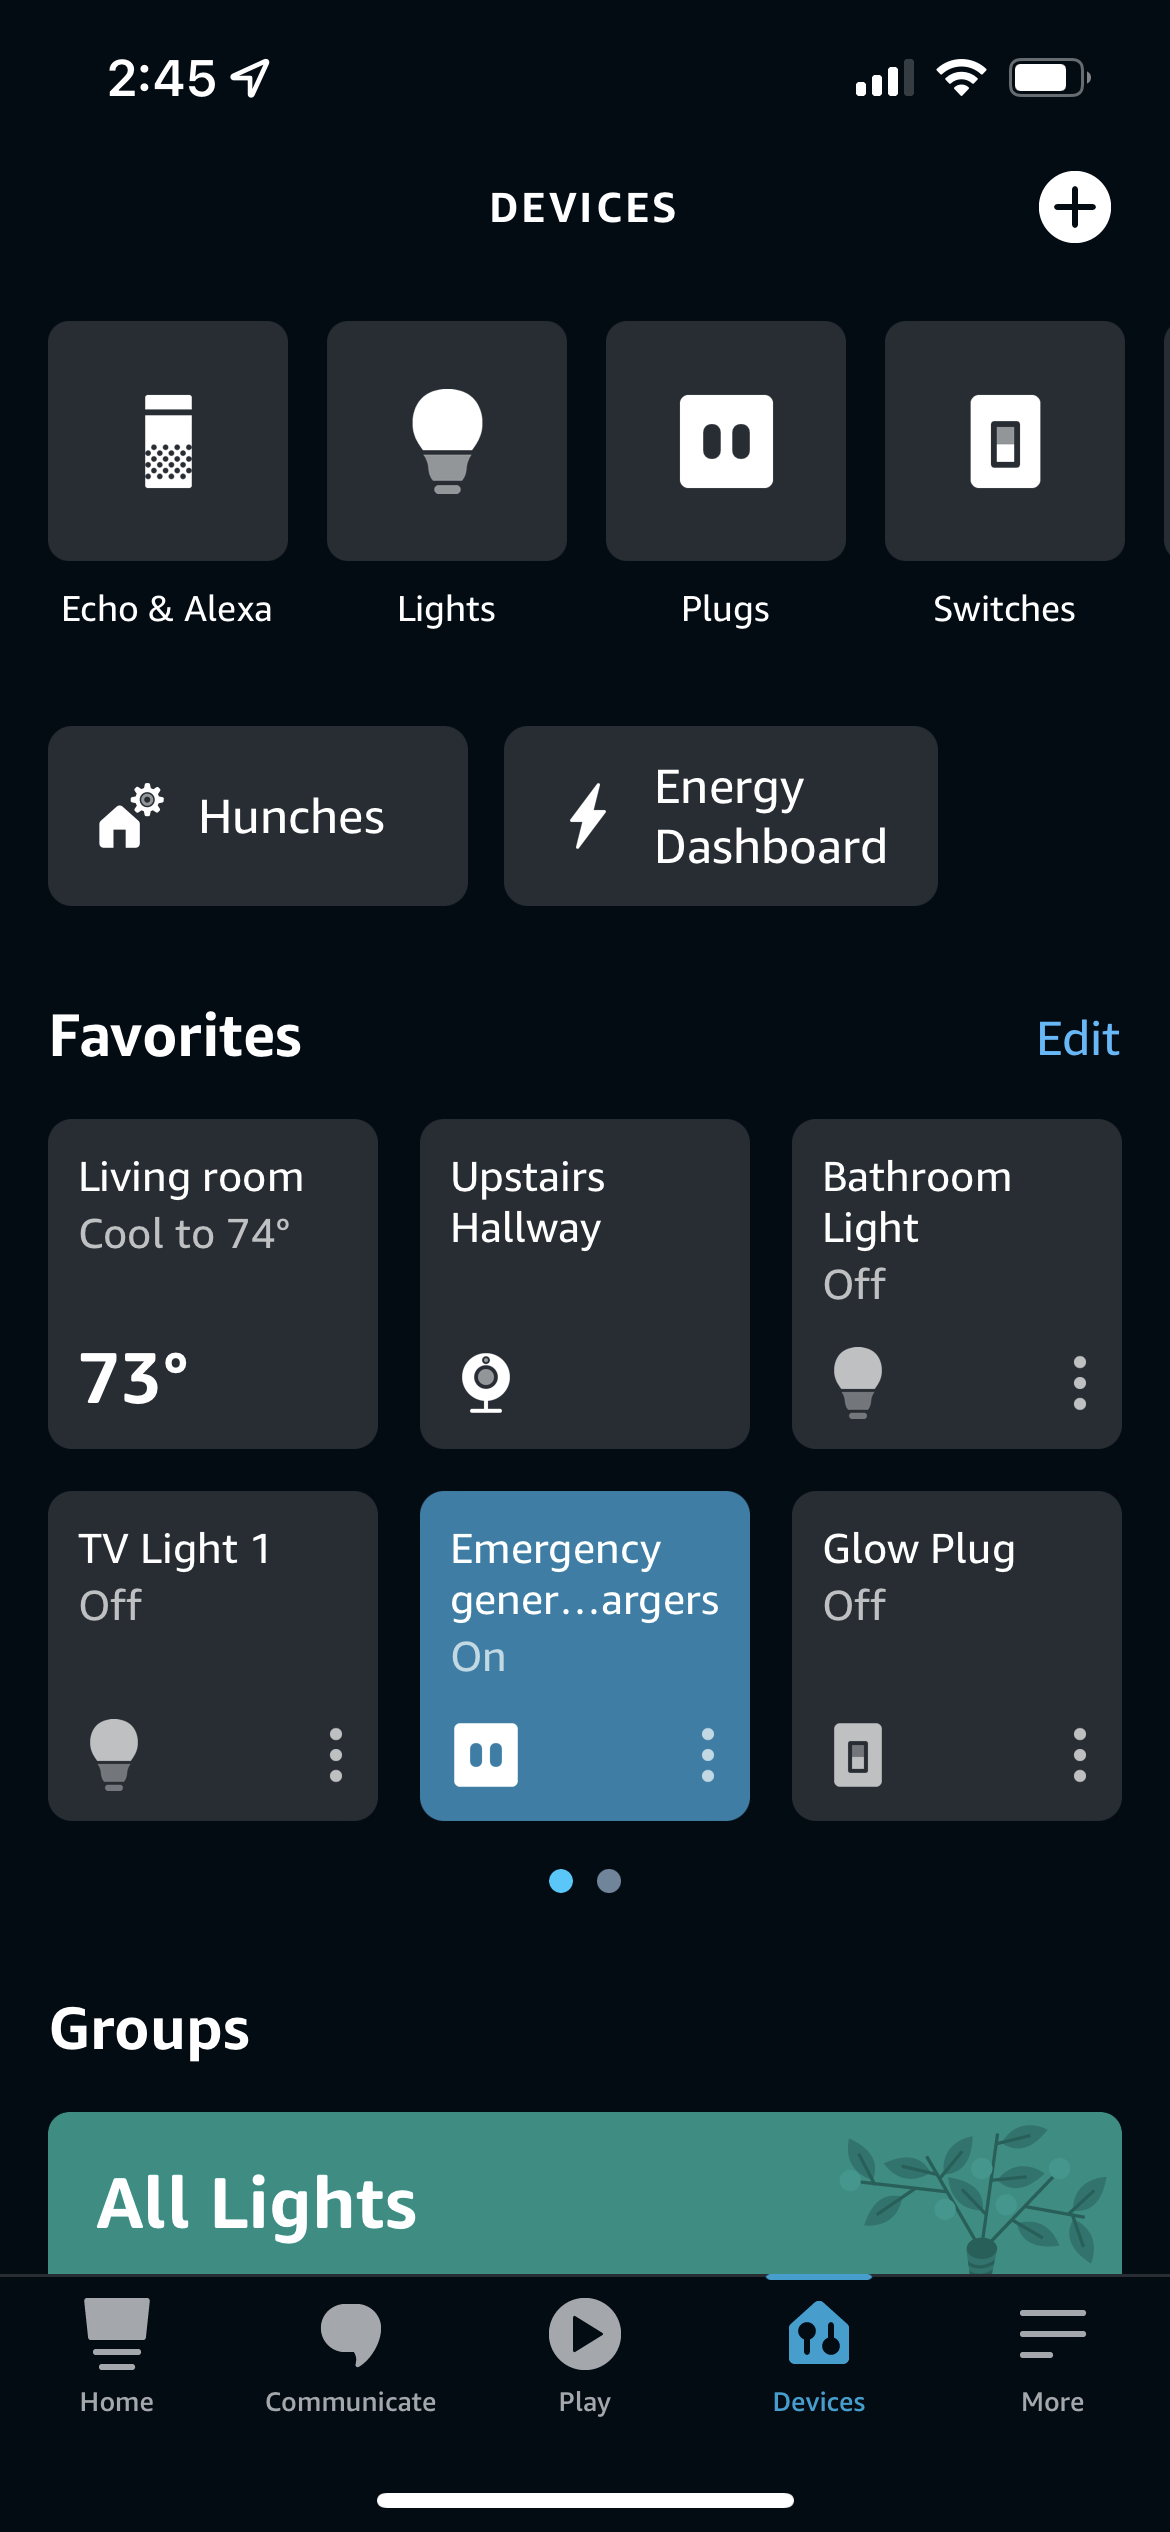 The Devices dashboard in the Amazon Alexa app